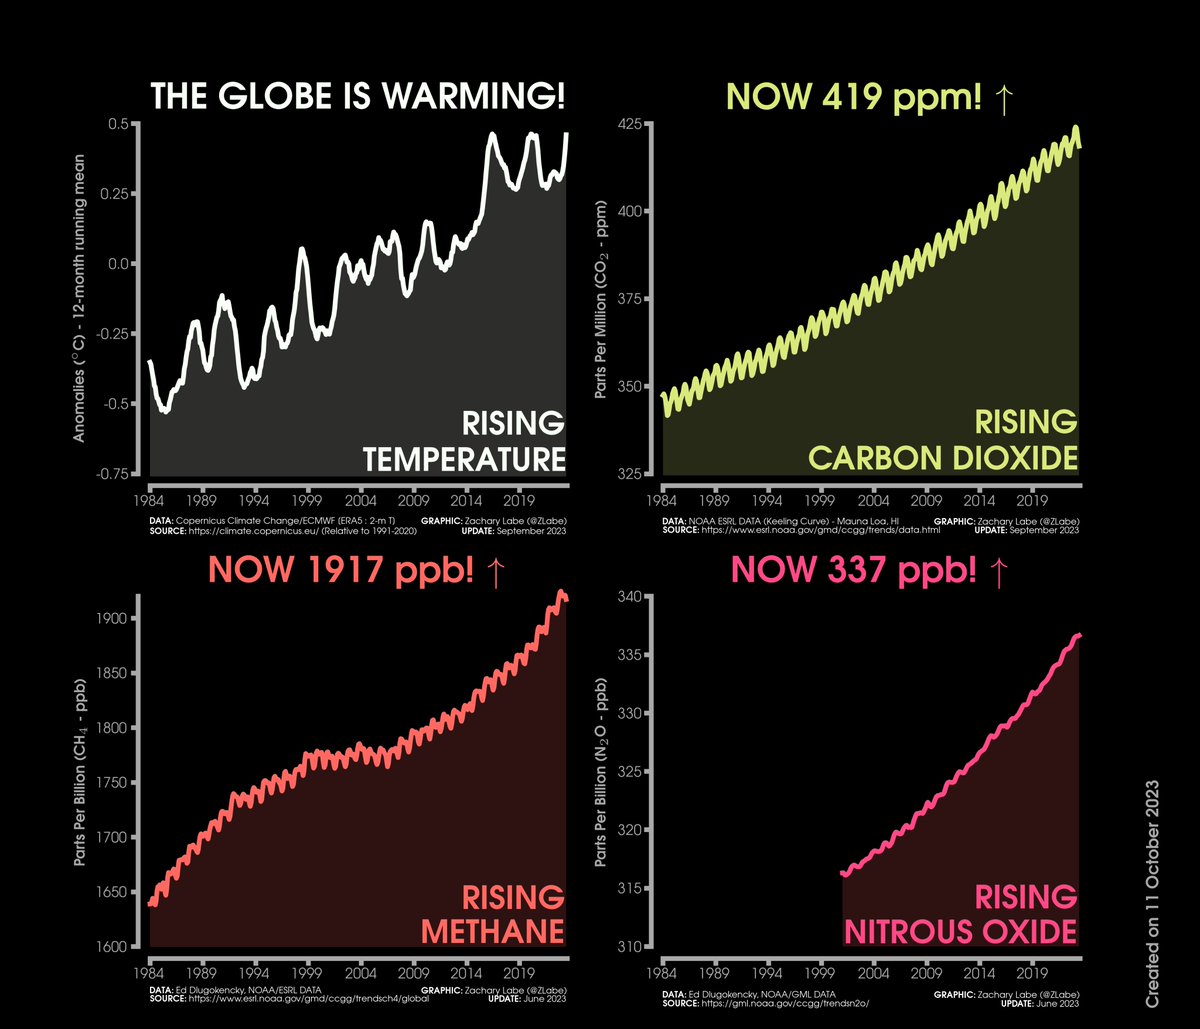 I do not have better news. Last monthly climate indicators update: zacklabe.com/climate-change…